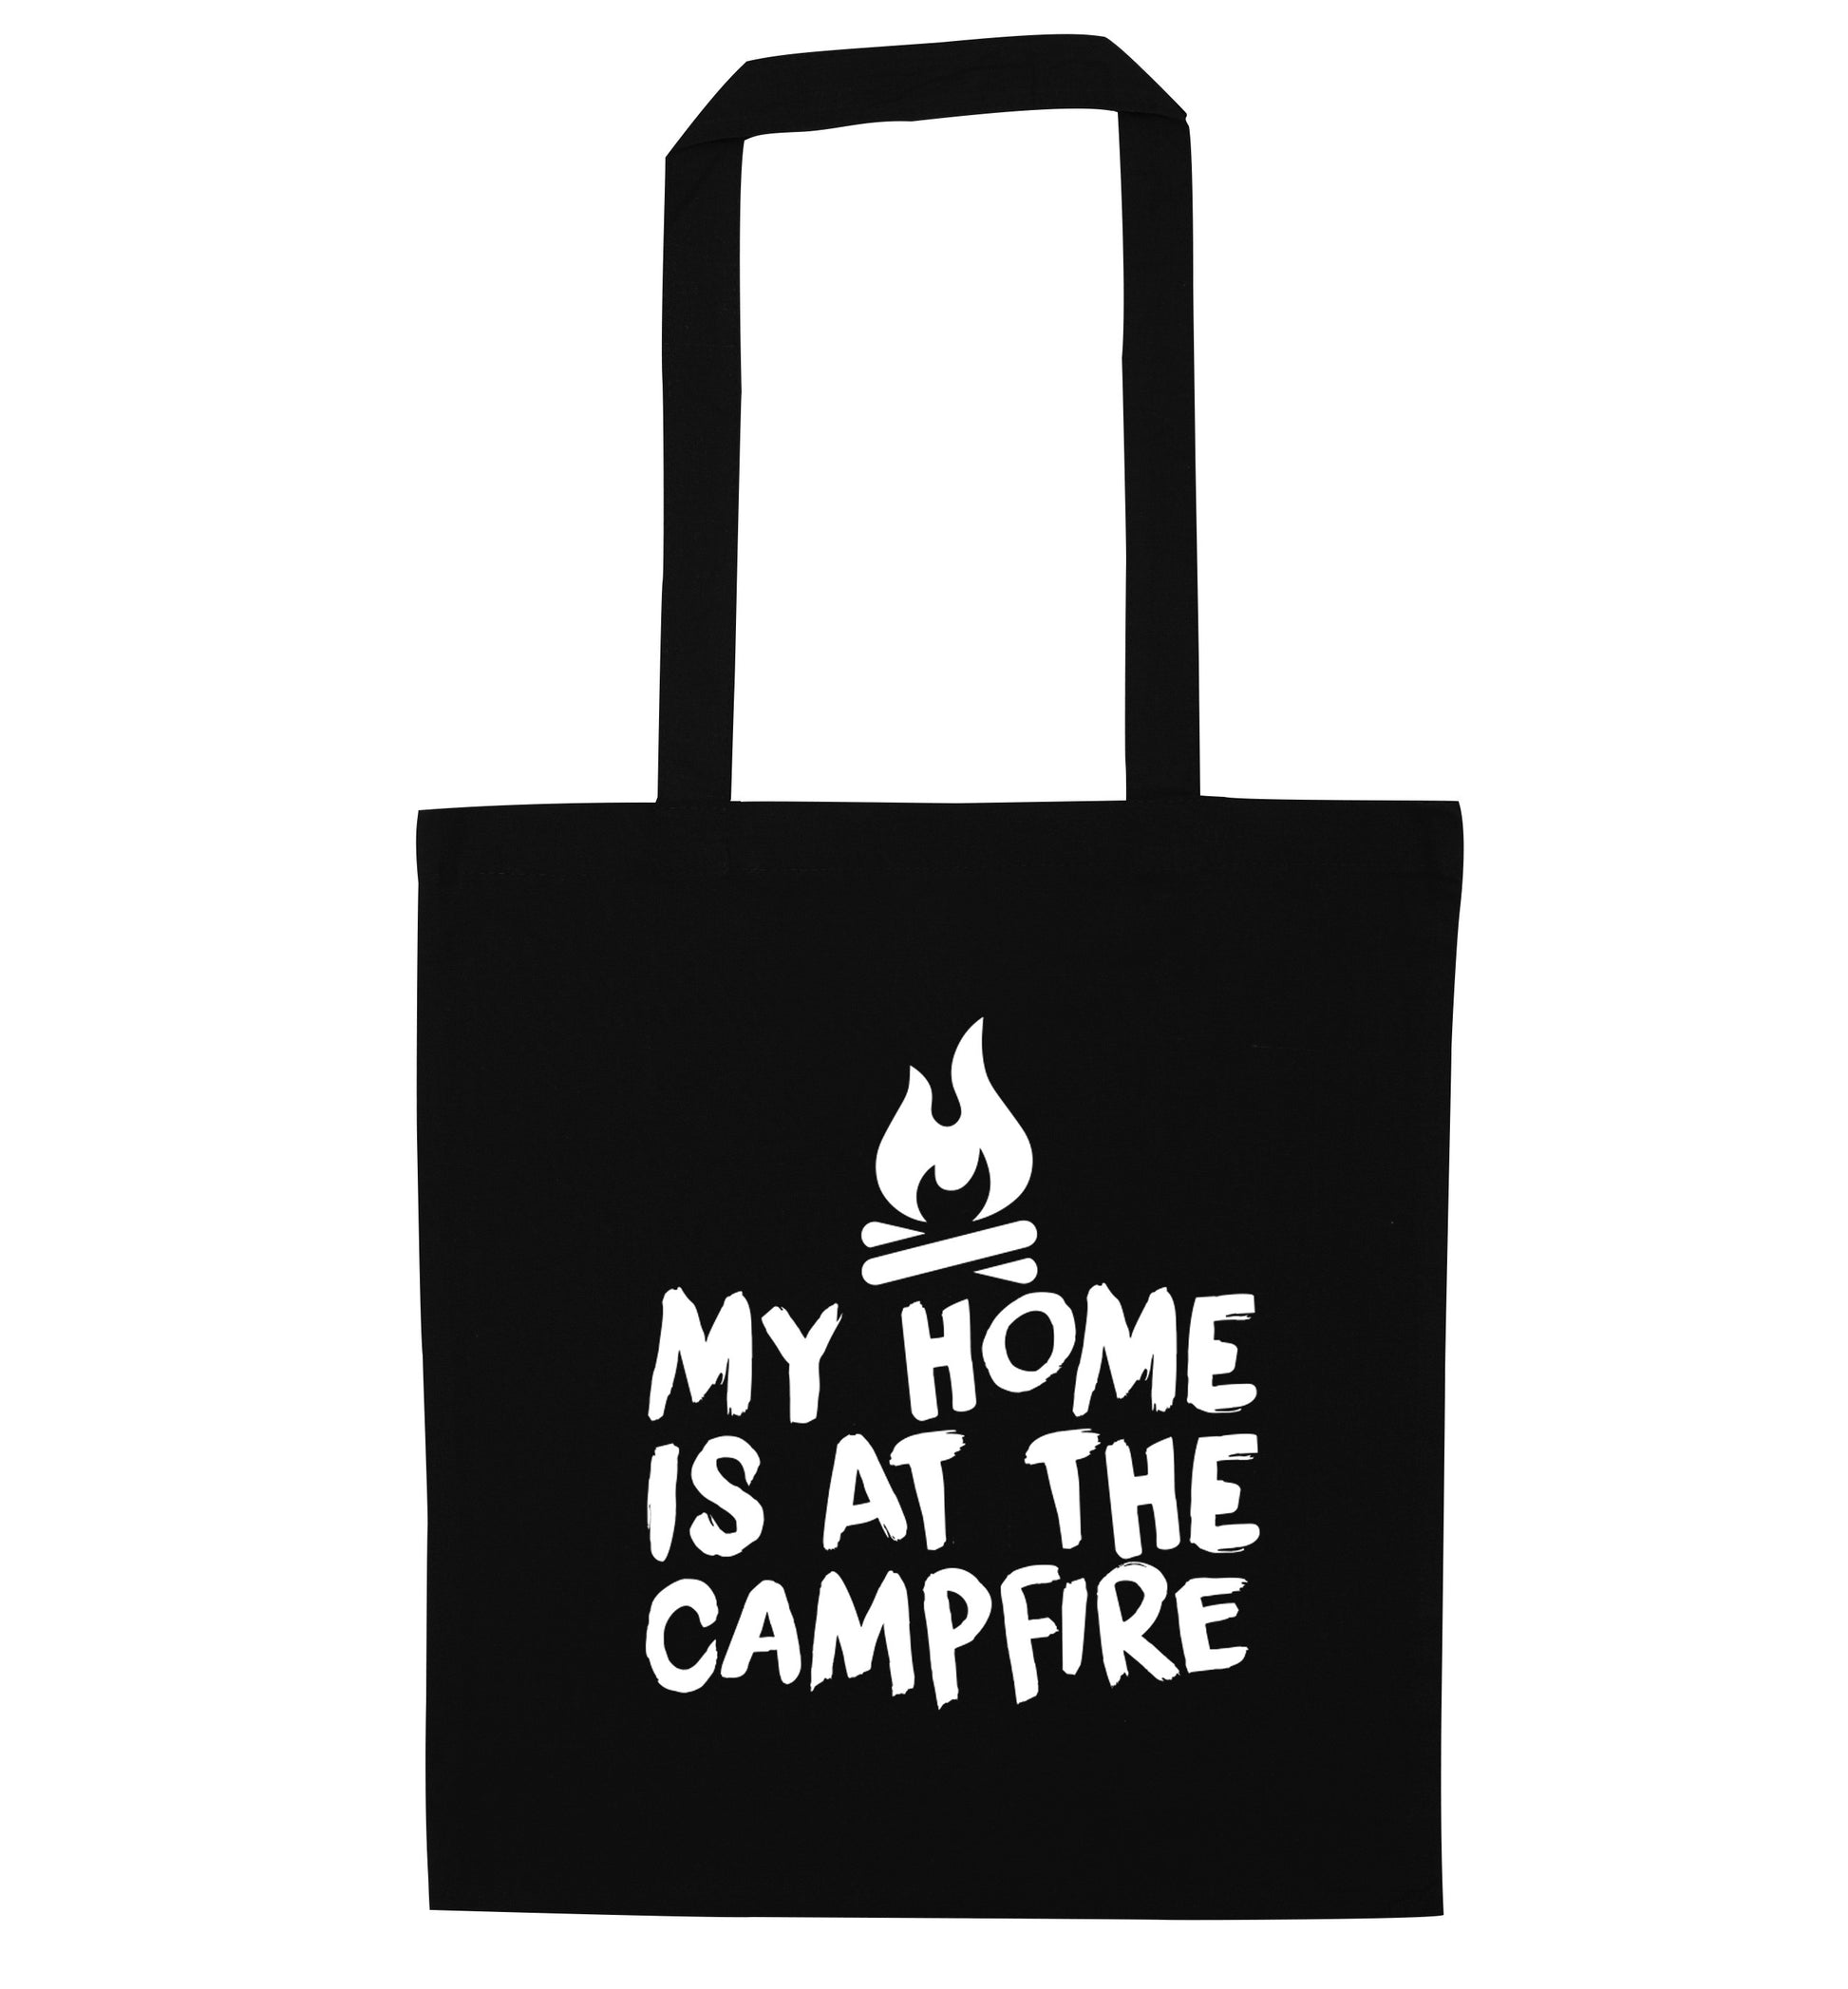 My home is at the campfire black tote bag